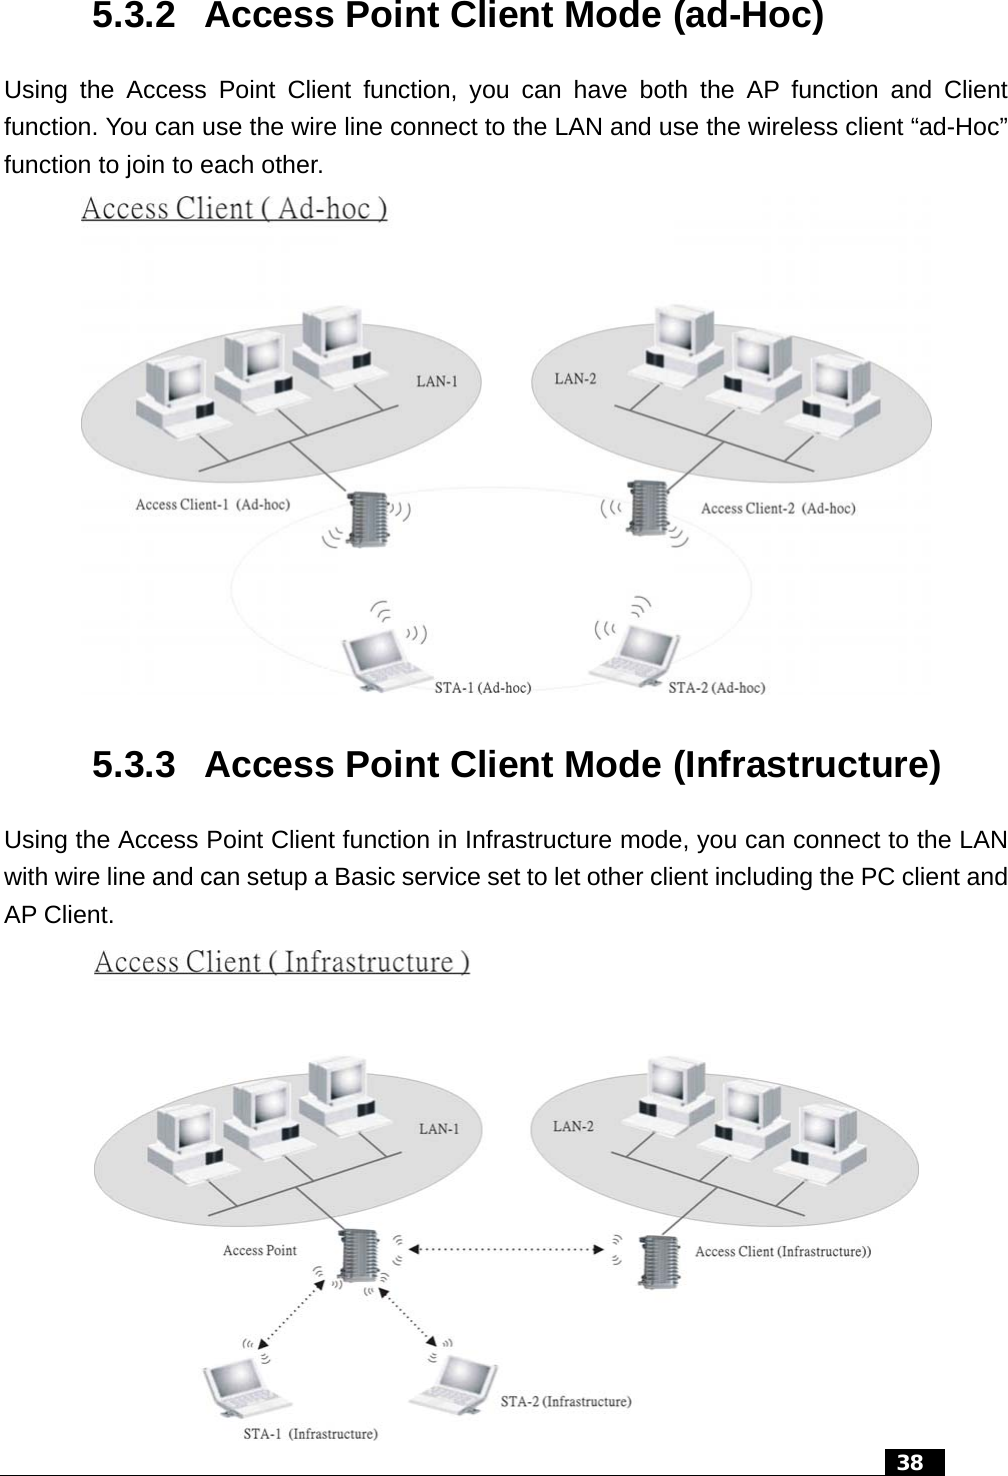 5.3.2  Access Point Client Mode (ad-Hoc) Using the Access Point Client function, you can have both the AP function and Client function. You can use the wire line connect to the LAN and use the wireless client “ad-Hoc” function to join to each other.  5.3.3  Access Point Client Mode (Infrastructure) Using the Access Point Client function in Infrastructure mode, you can connect to the LAN with wire line and can setup a Basic service set to let other client including the PC client and AP Client.   38   